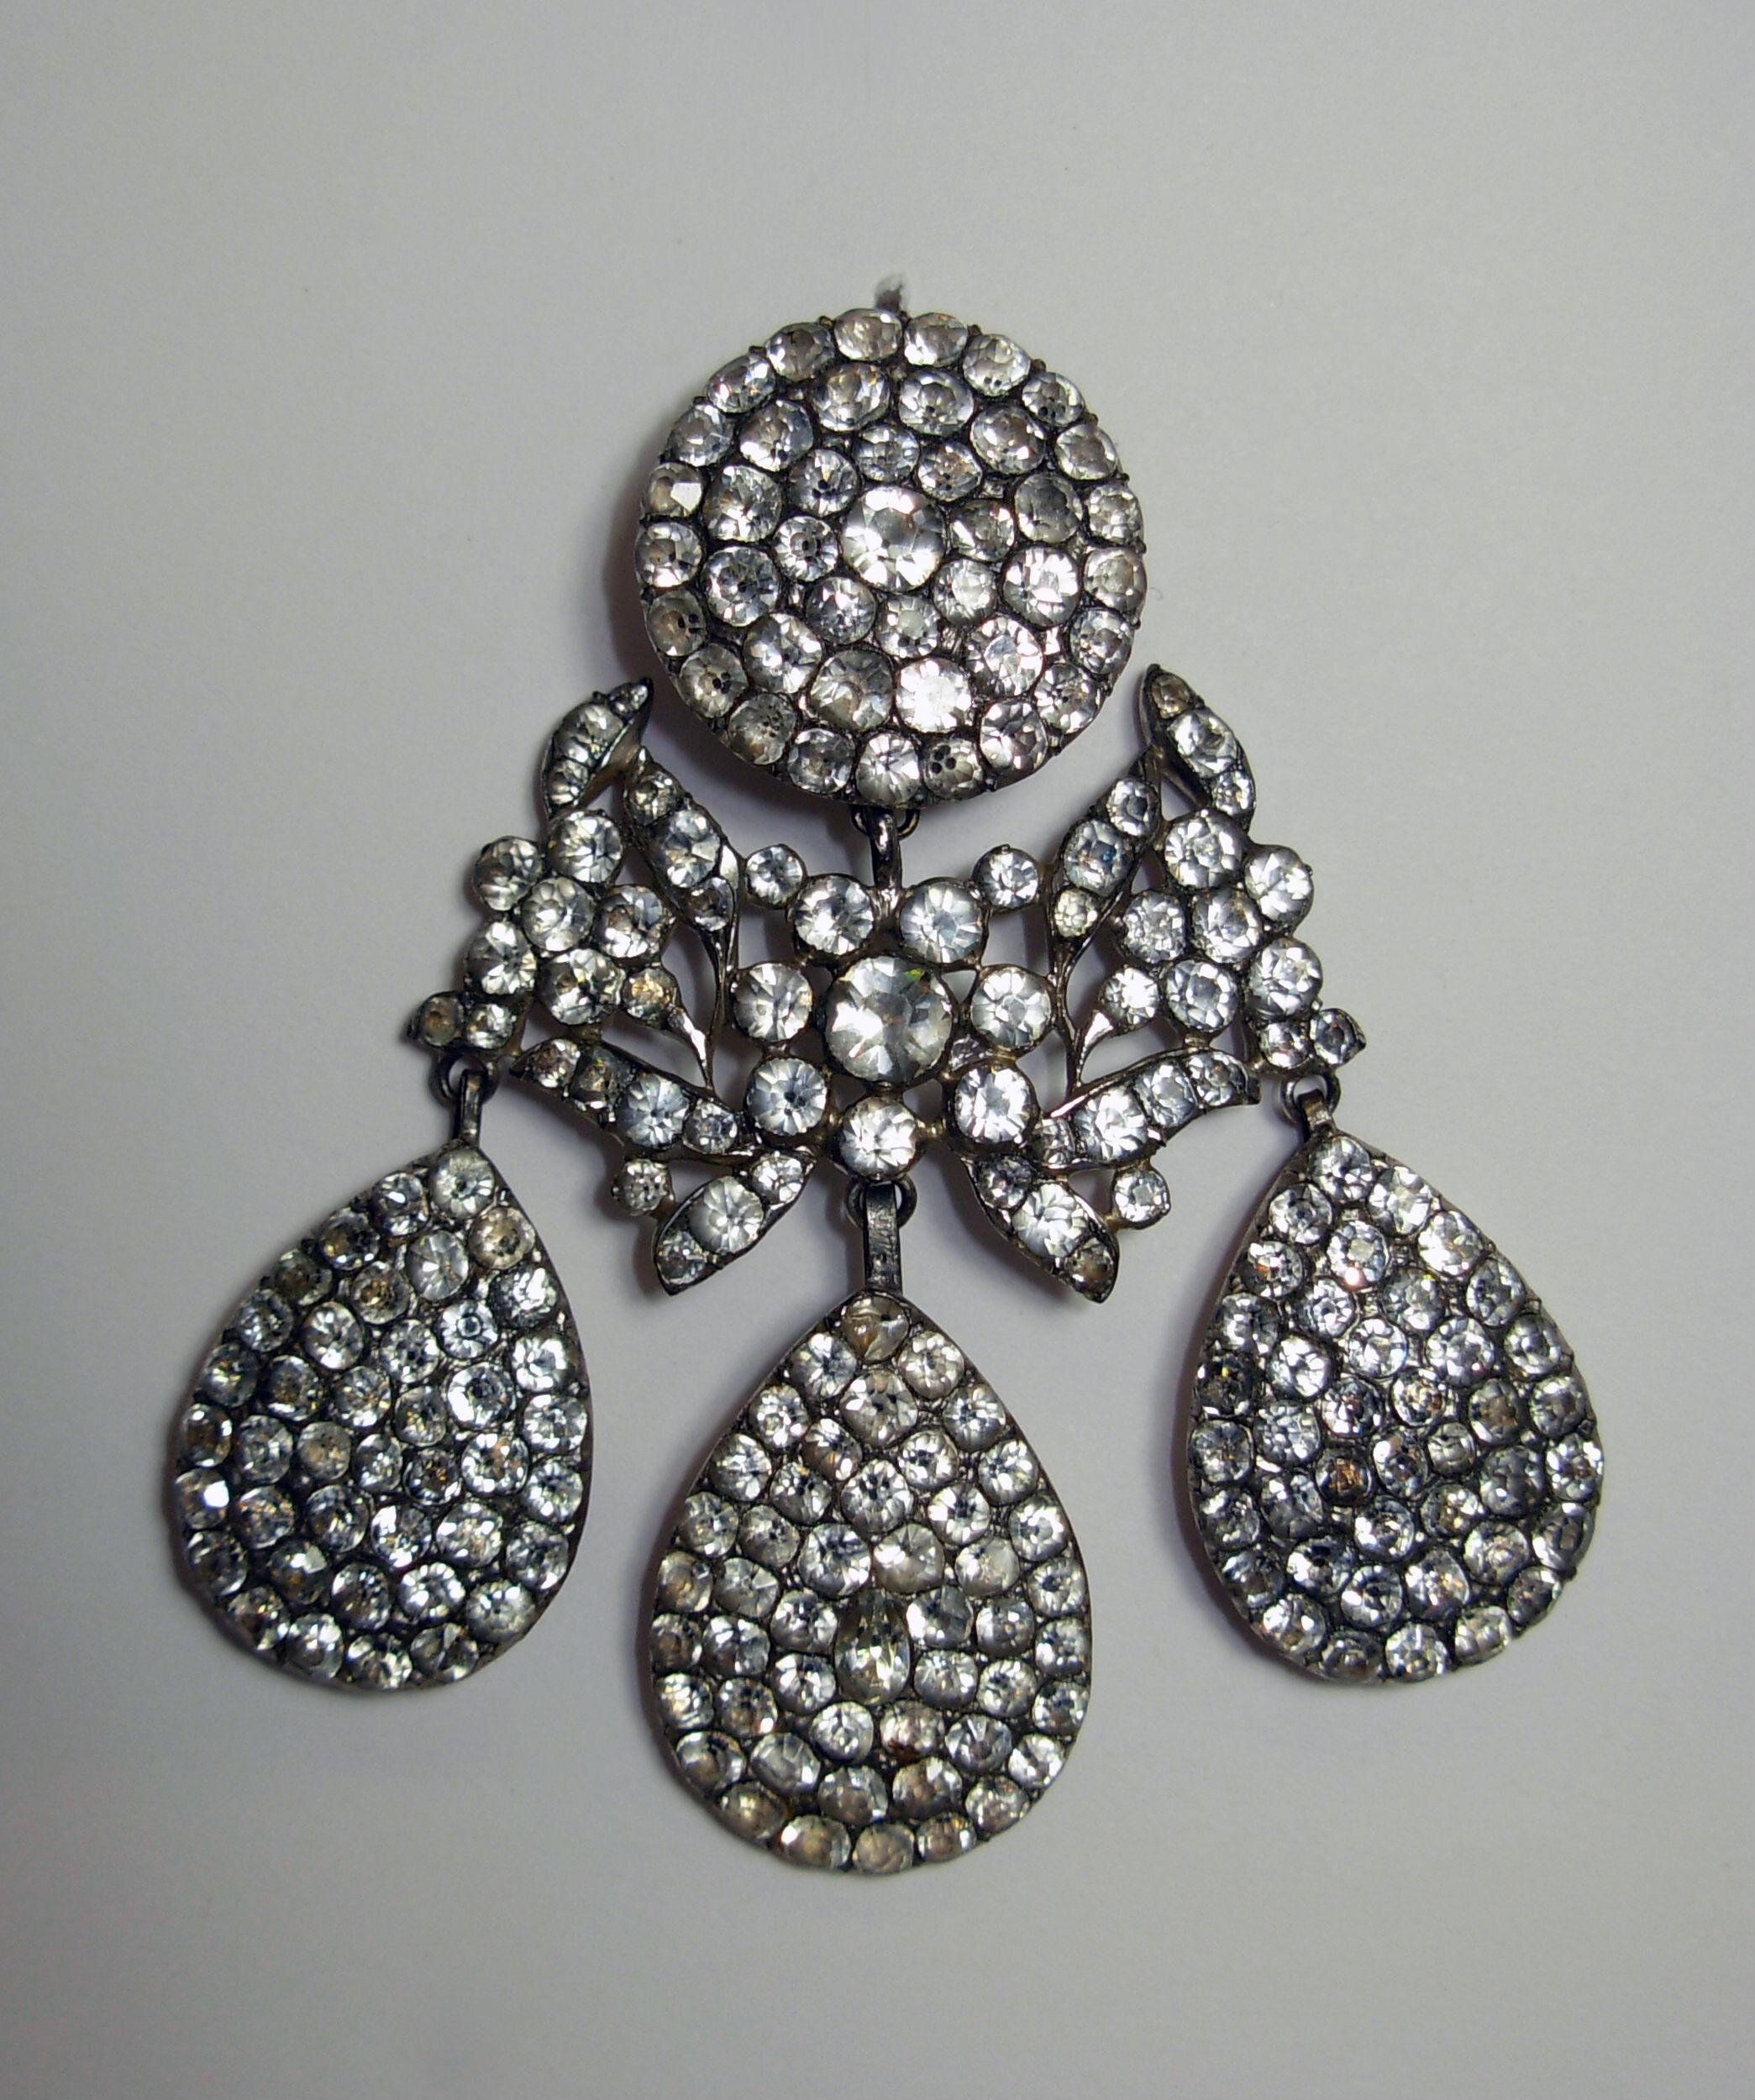 Paste girandole earrings, 1800-1860. Each paste is in a closed setting with a black spot painted on the cullet of each.